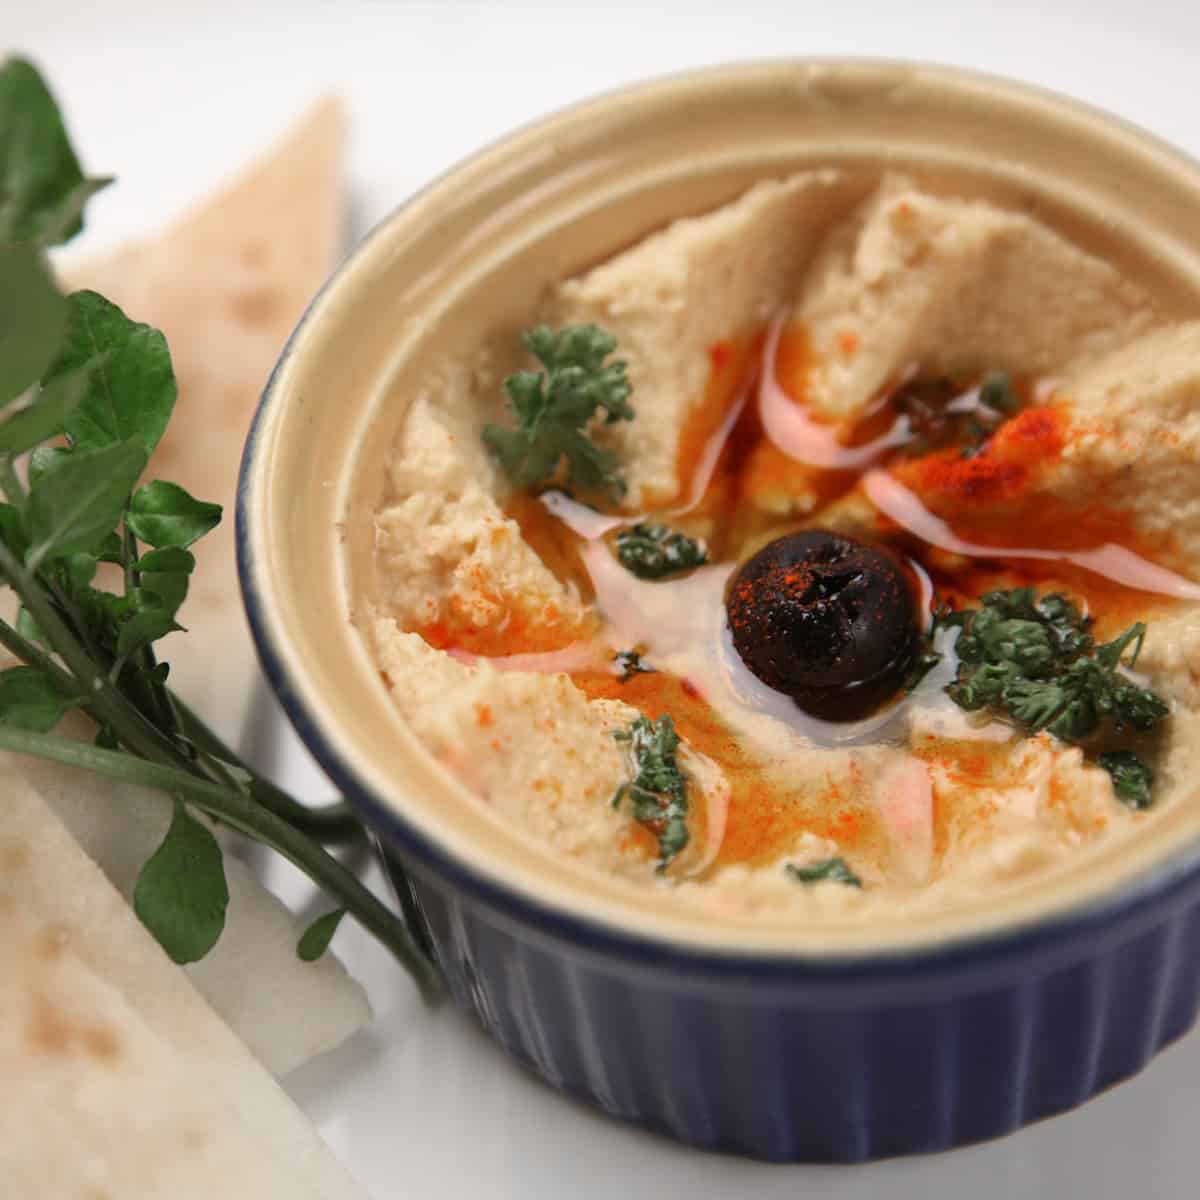 Bowl of hummus with a side of pita bread makes a great snack from your food storage.